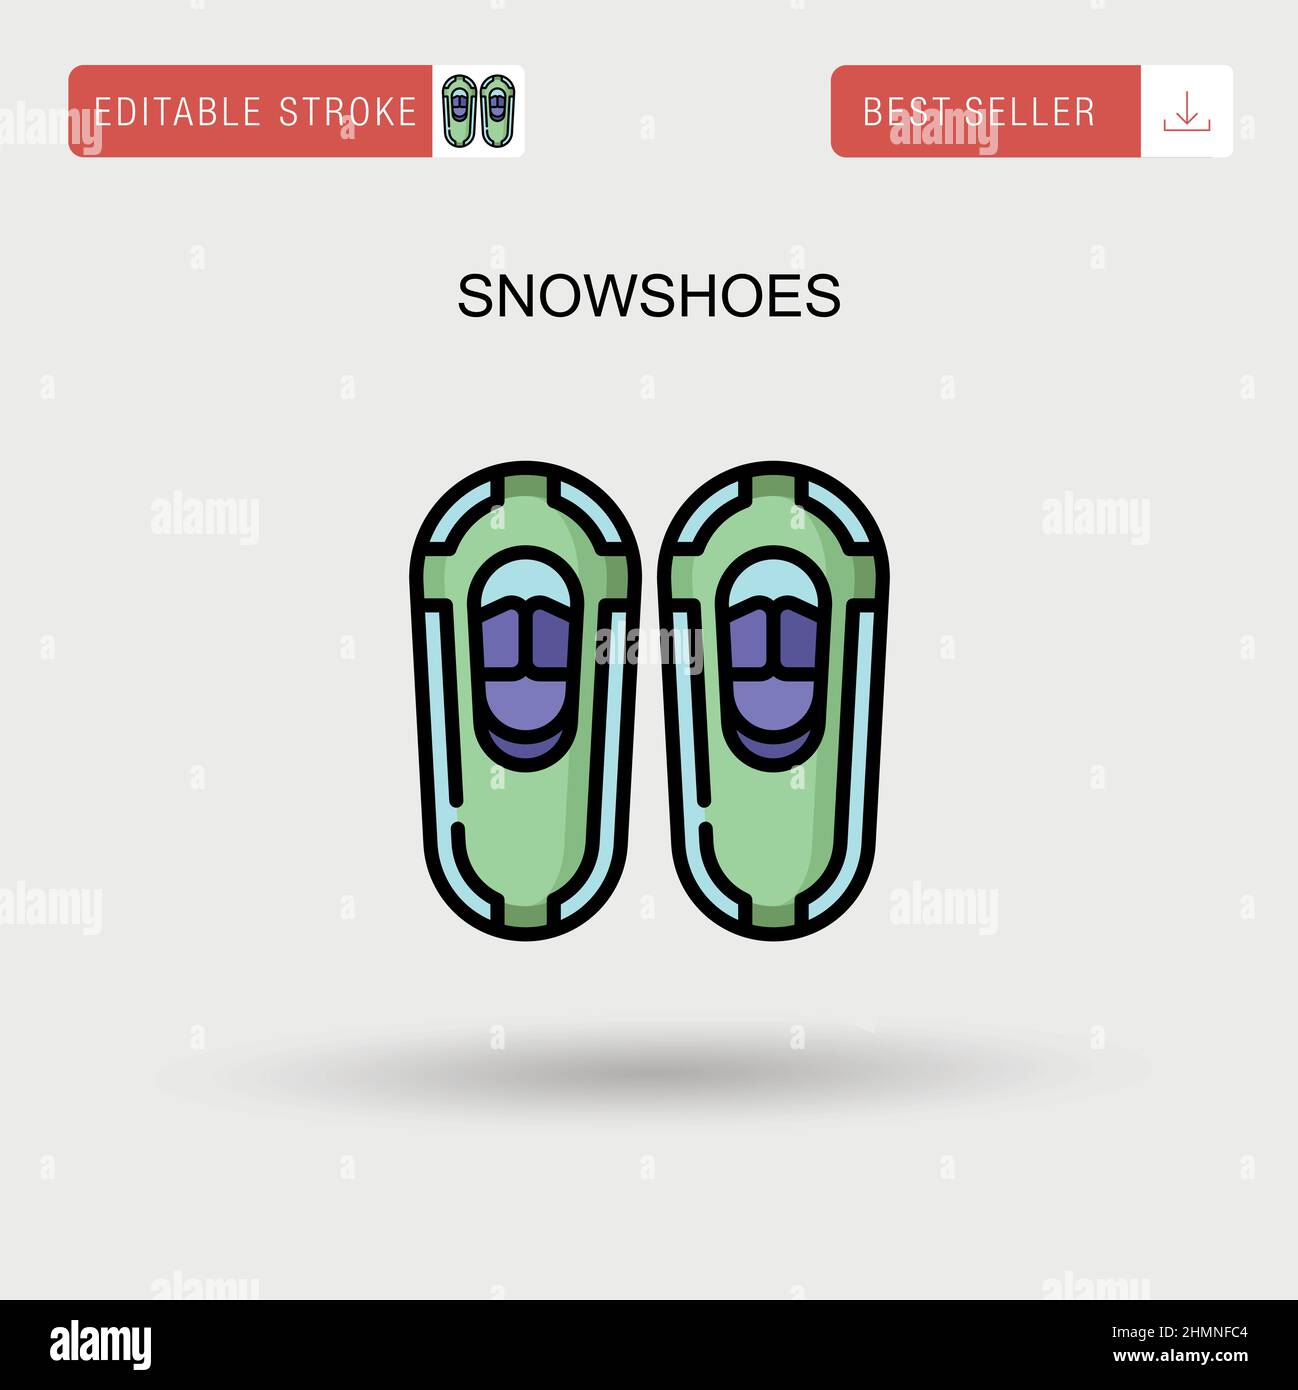 Snowshoes Simple vector icon. Stock Vector